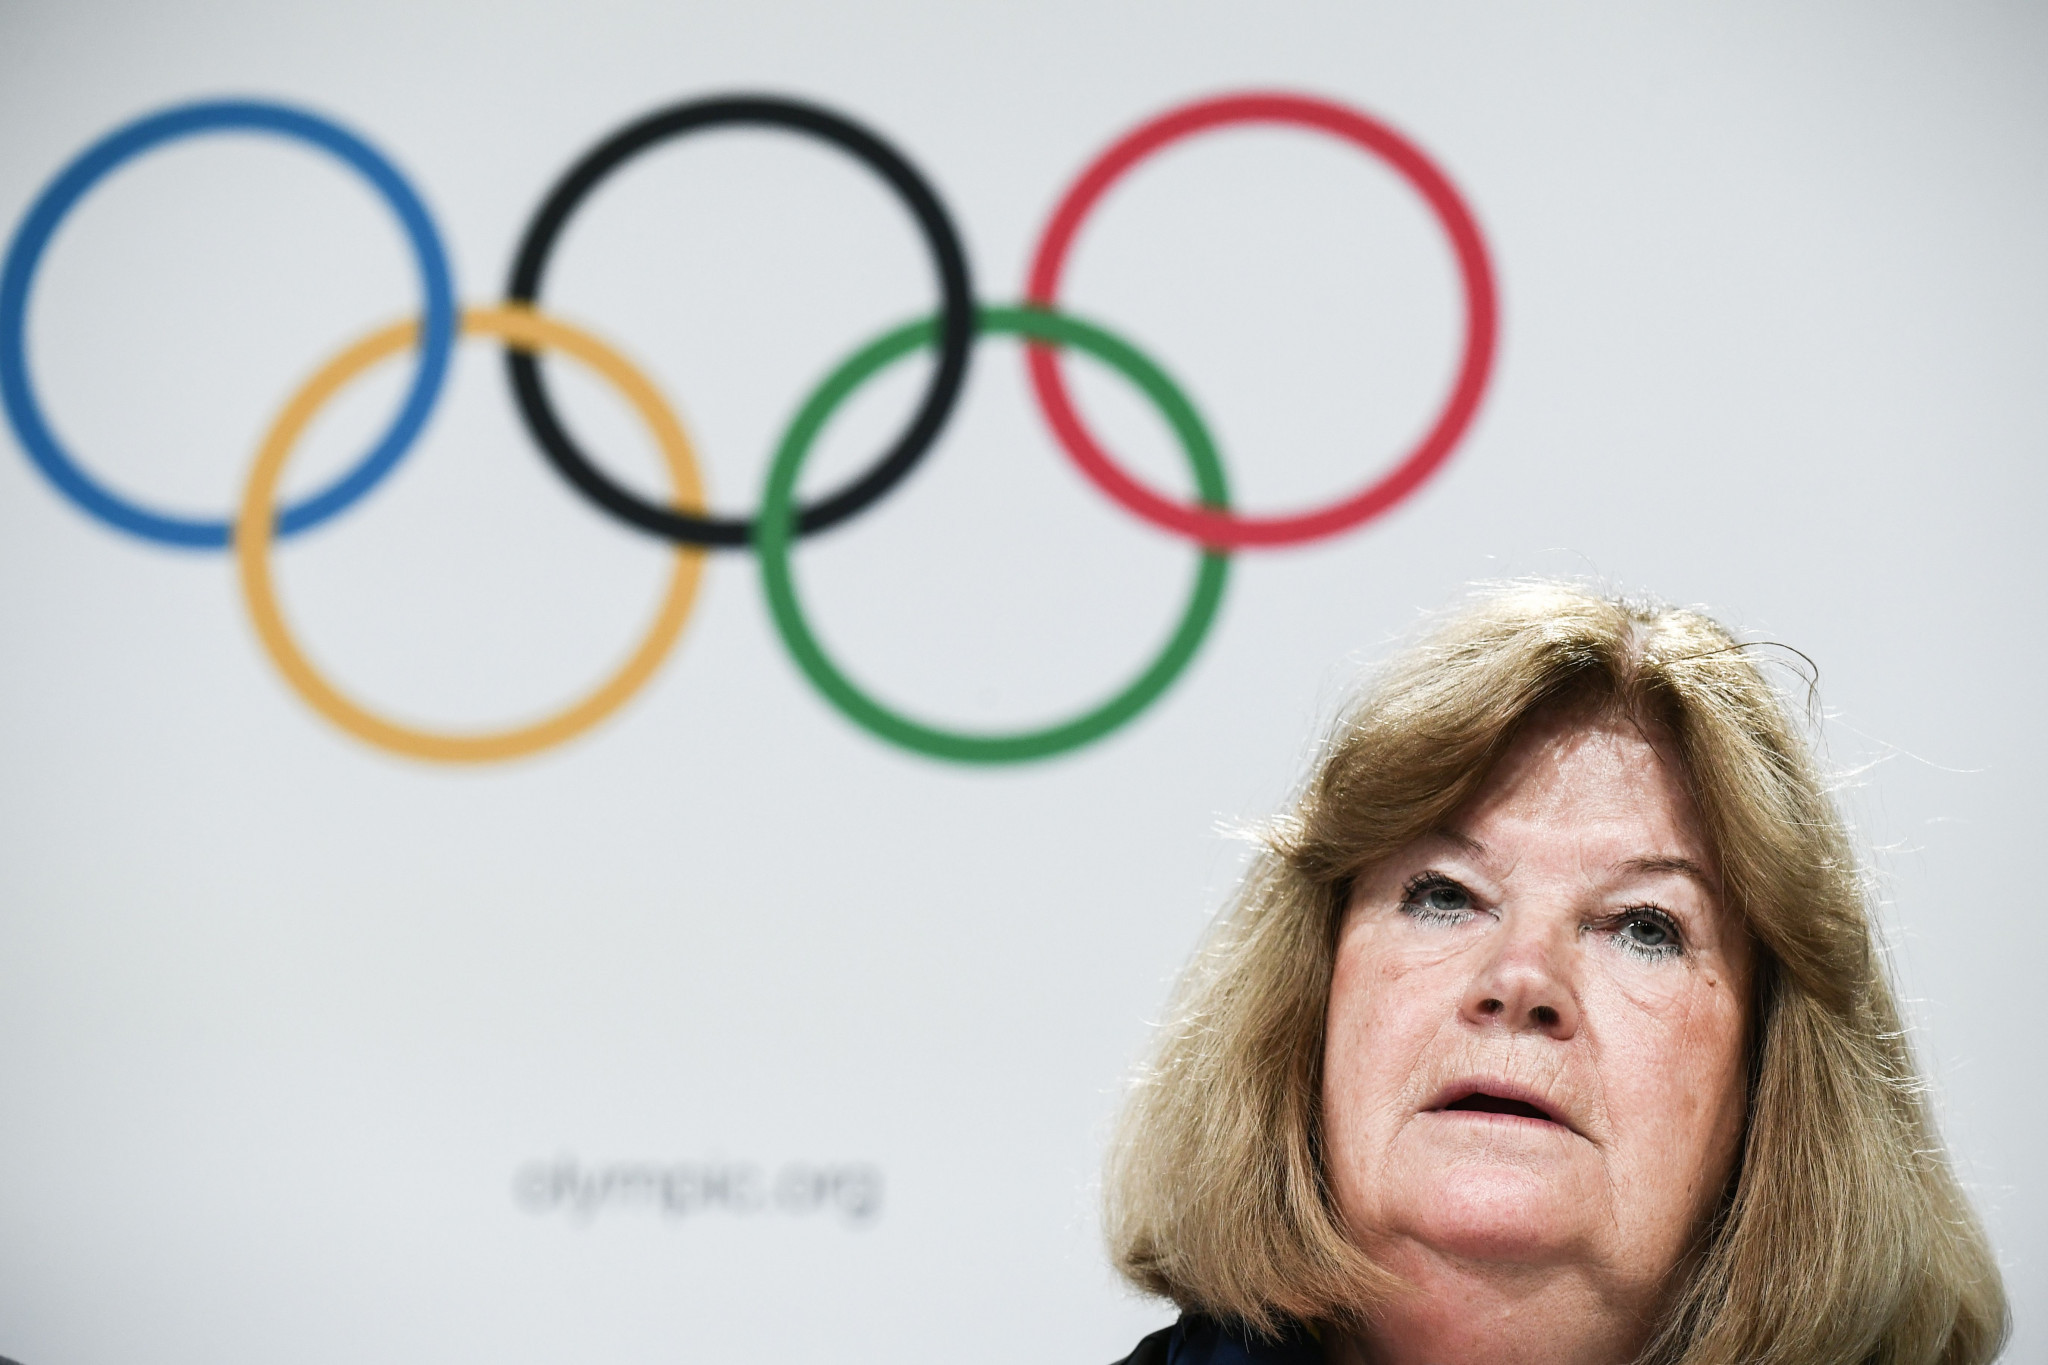 Lindberg suspends IOC Future Host Commission membership due to Sweden's 2030 Winter Olympics interest